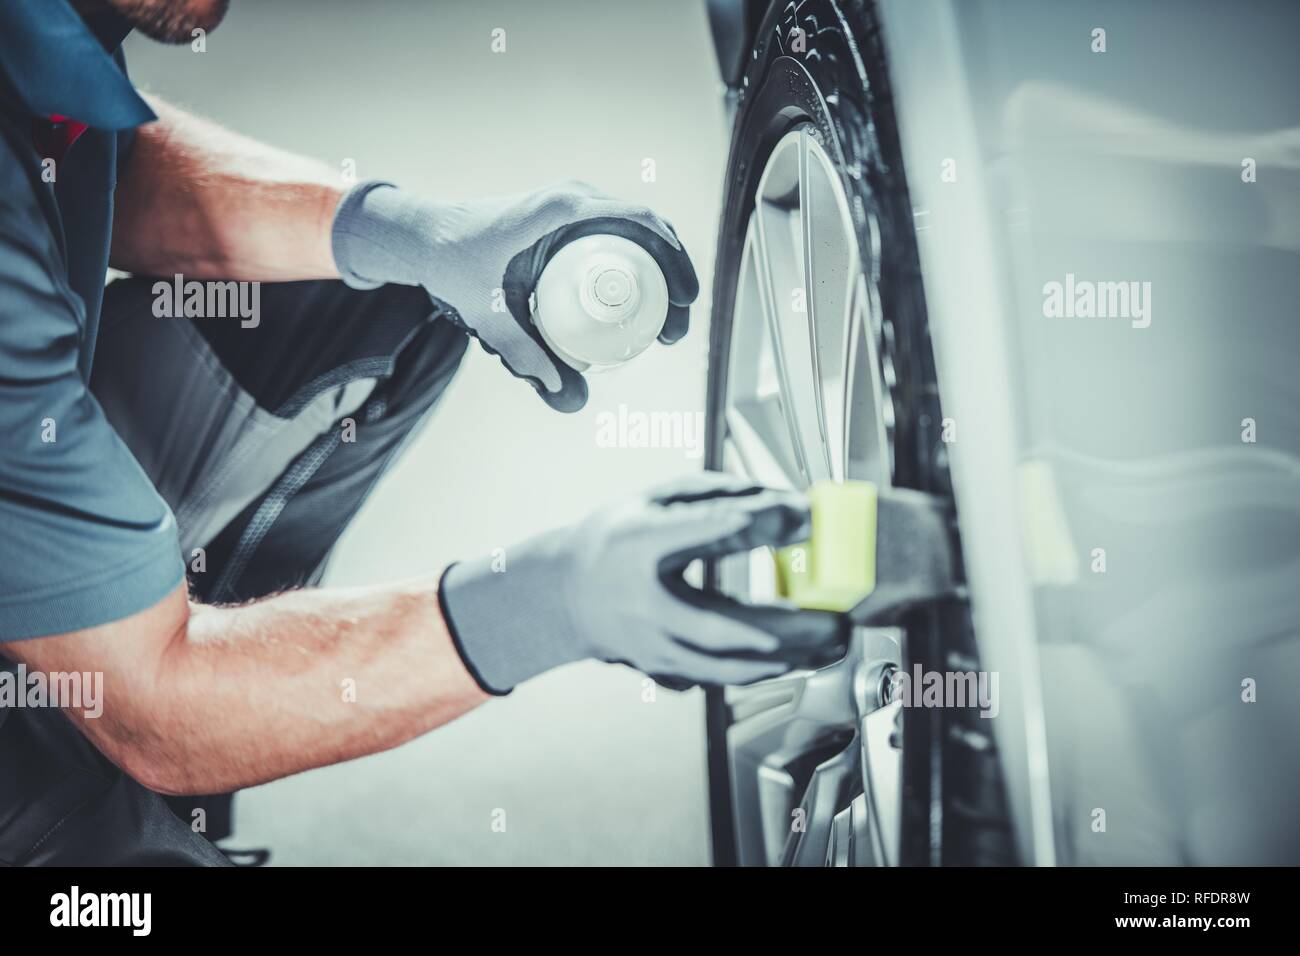 Car Wheels Pro Cleaning Using Professional Detergents. Vehicle Detailed Clean. Stock Photo